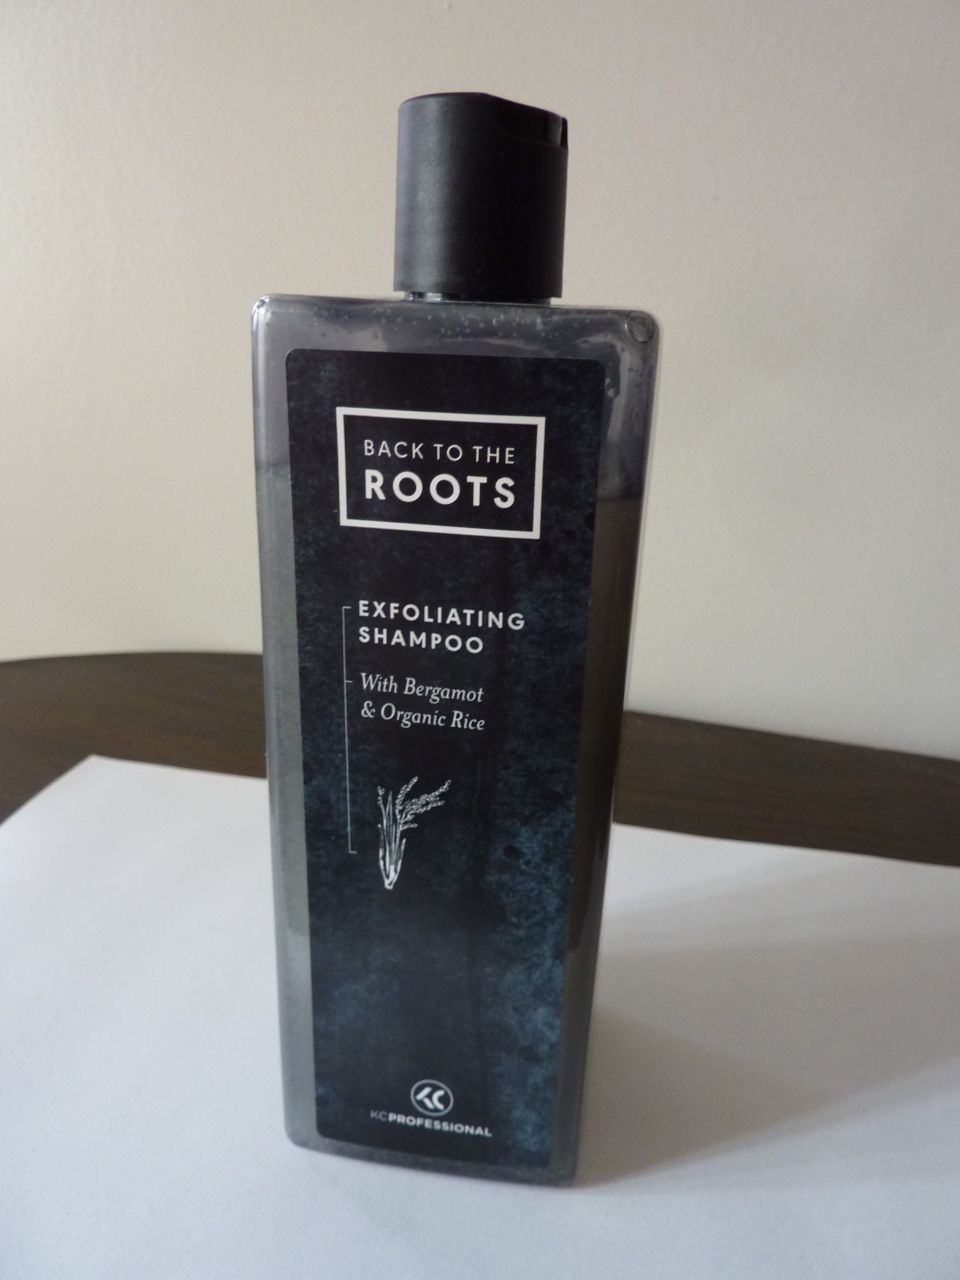 Back to the Roots Exfoliating shampoo